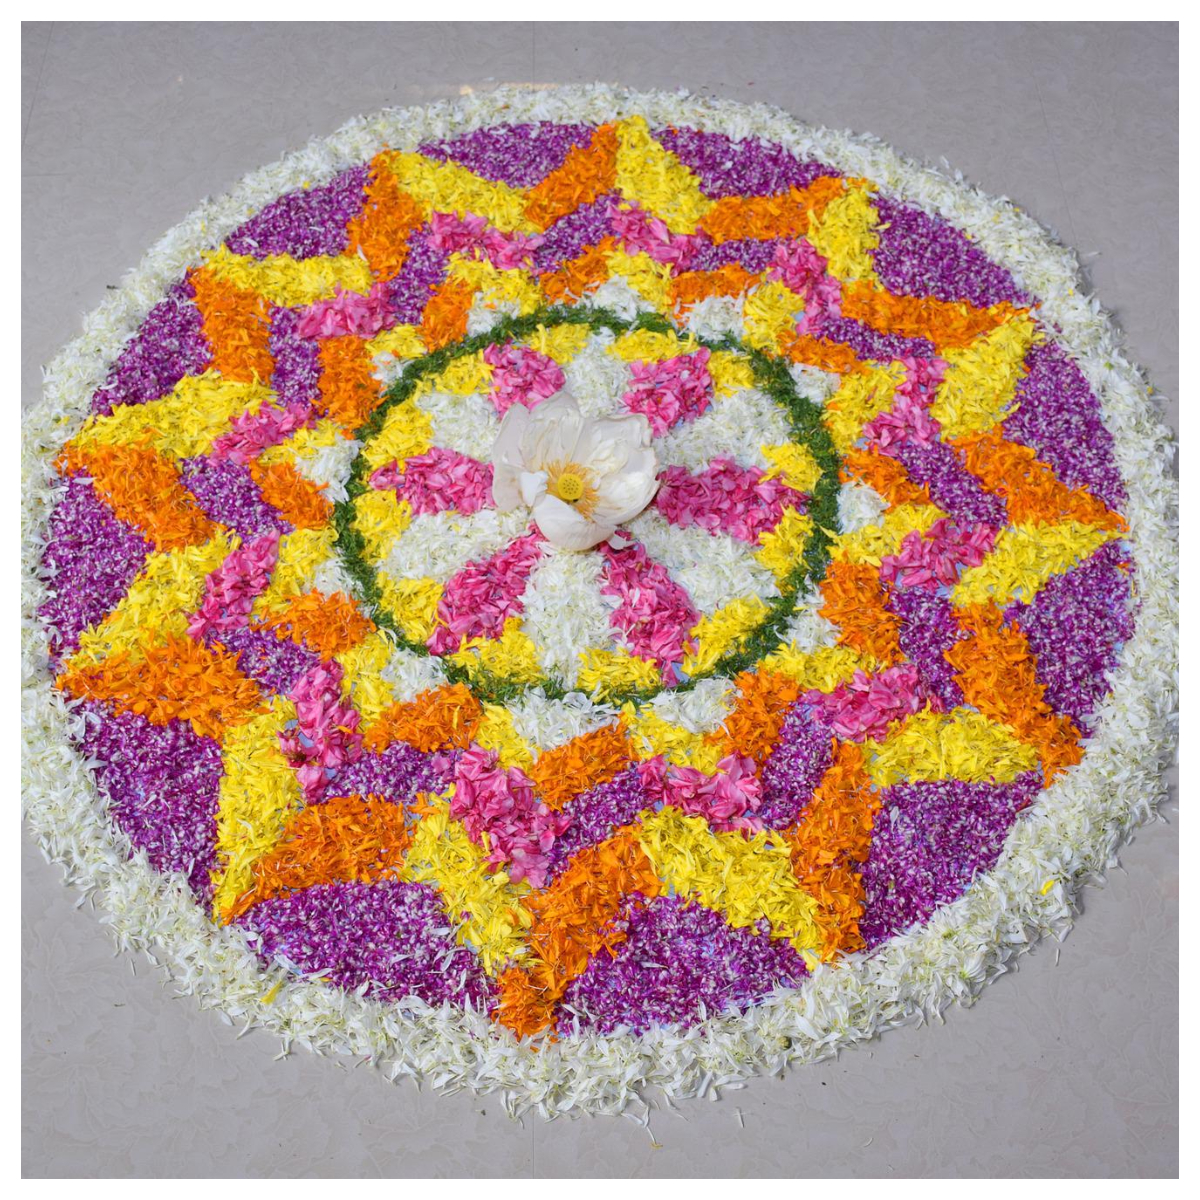 Pookalam: A 4 step guide to make this Onam festival rangoli extra special